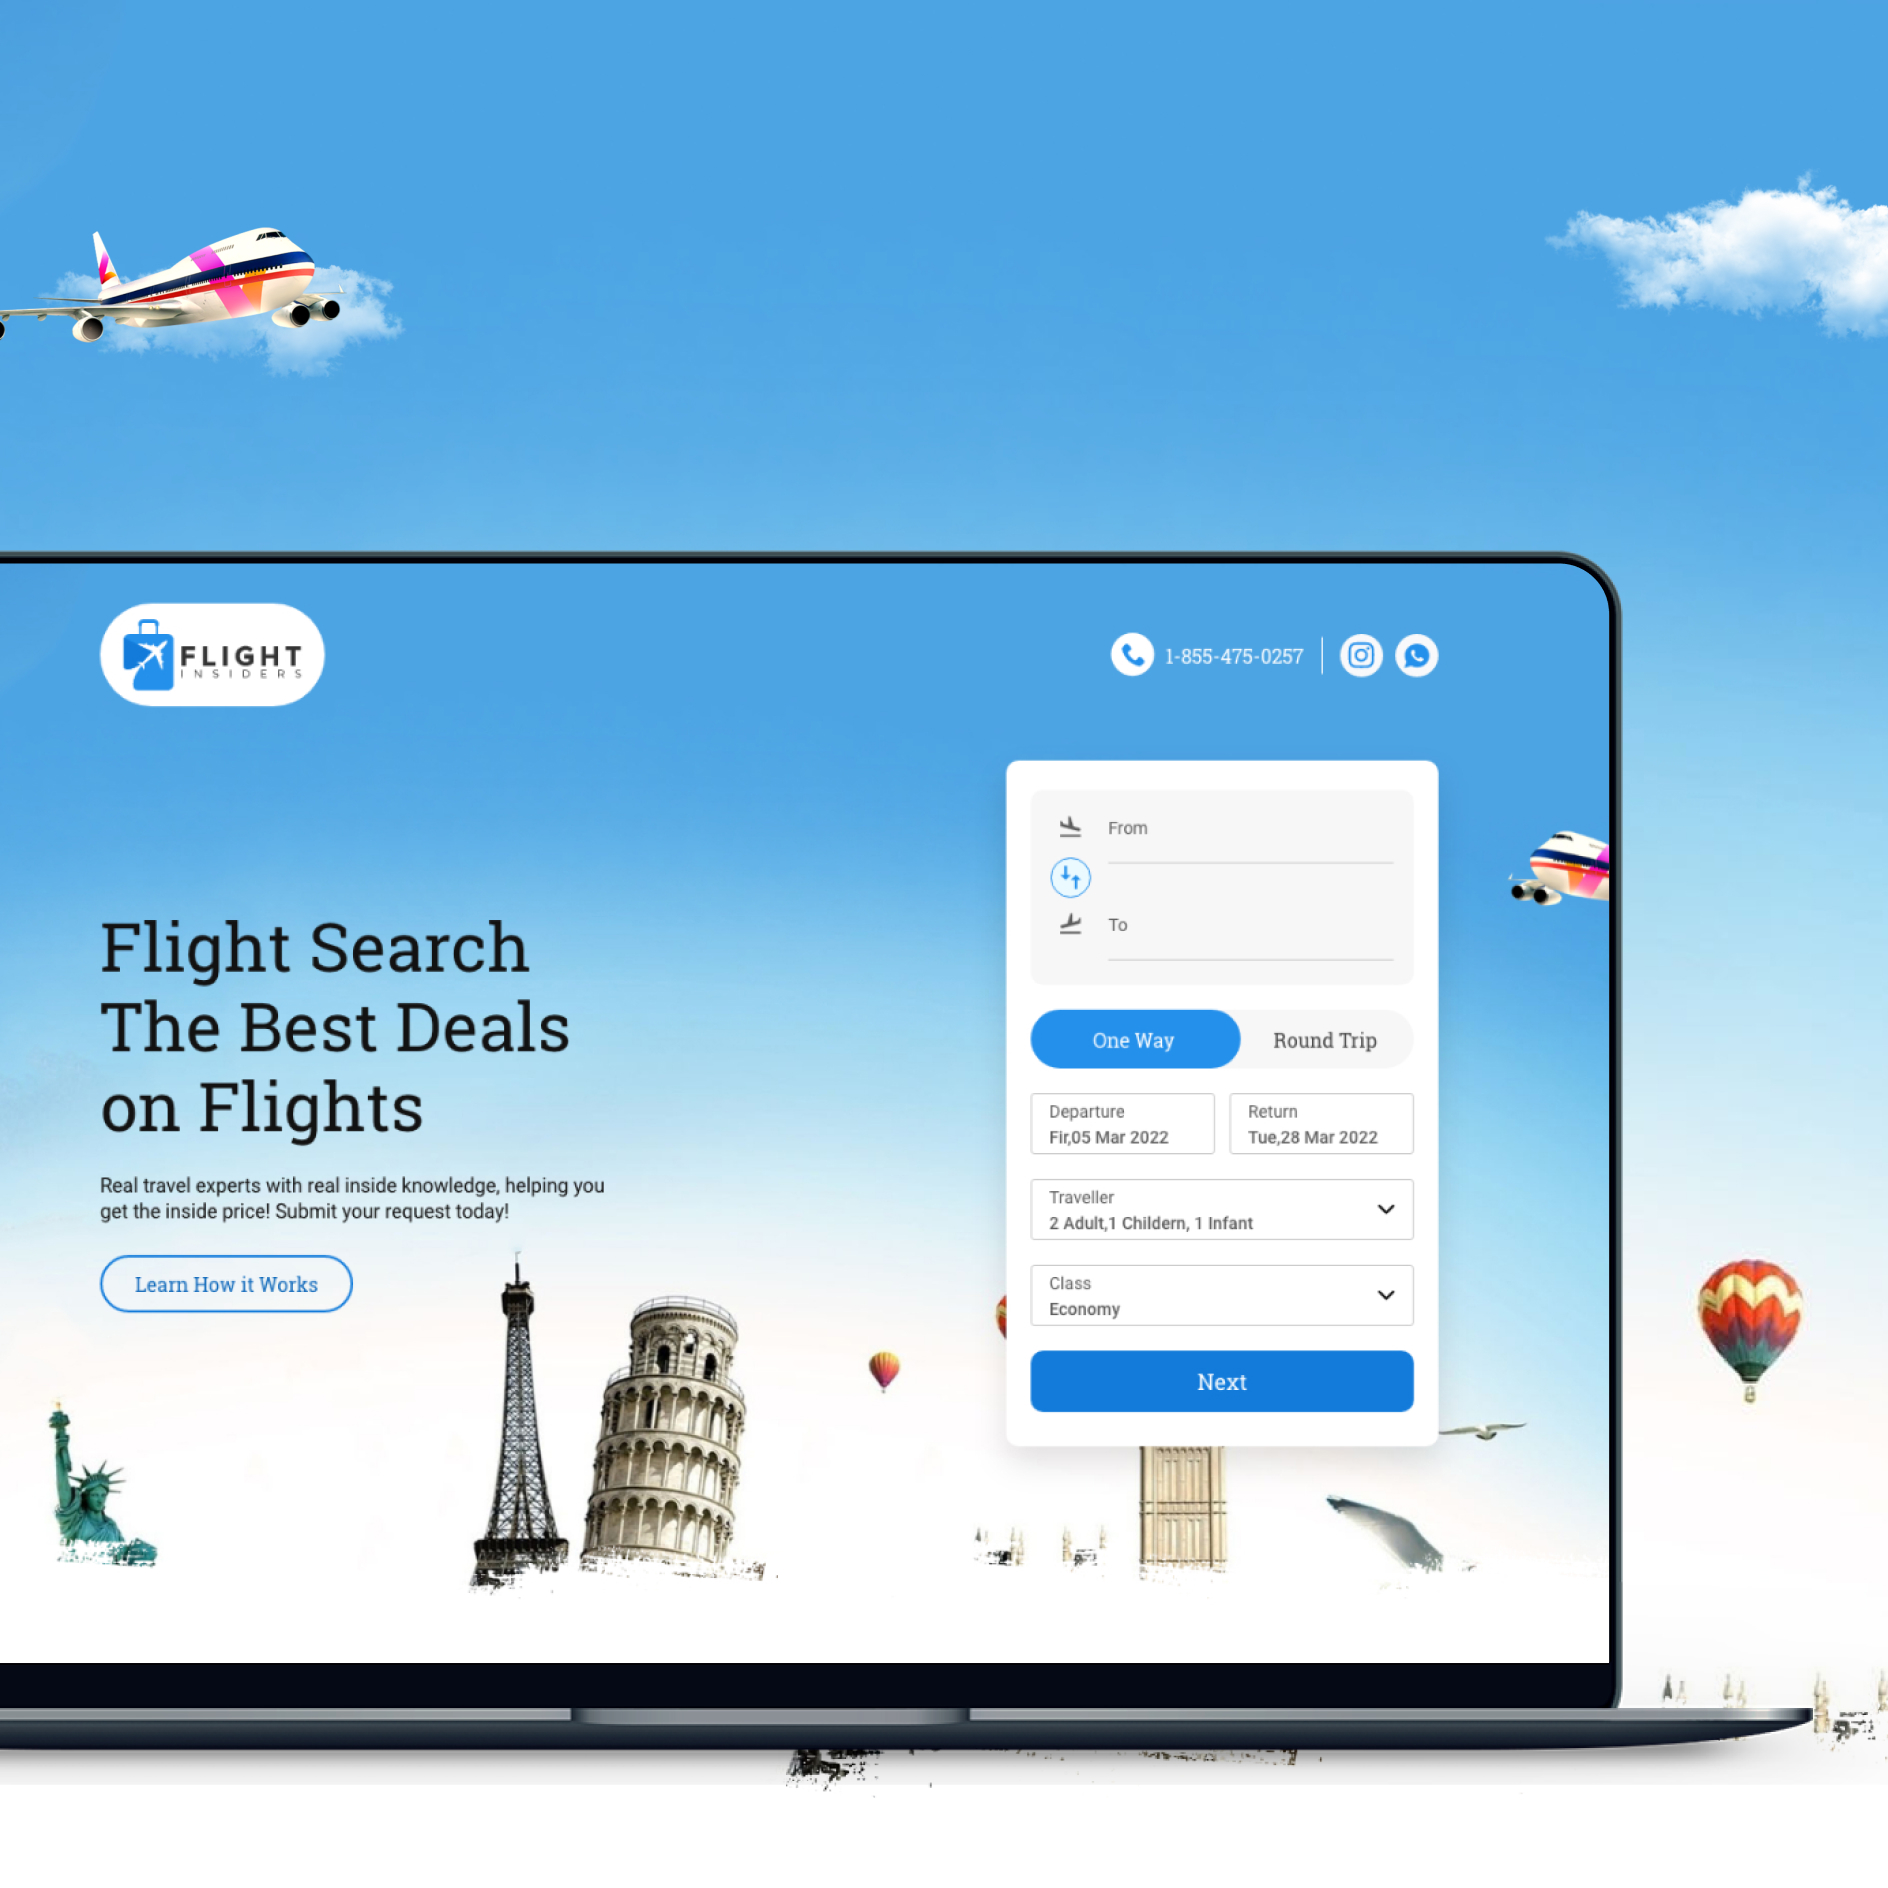 FLIGHTINSIDER: Your travel genie granting wishes for customised trips and unbeatable fares. Buckle up, it’s going to be a wild ride!